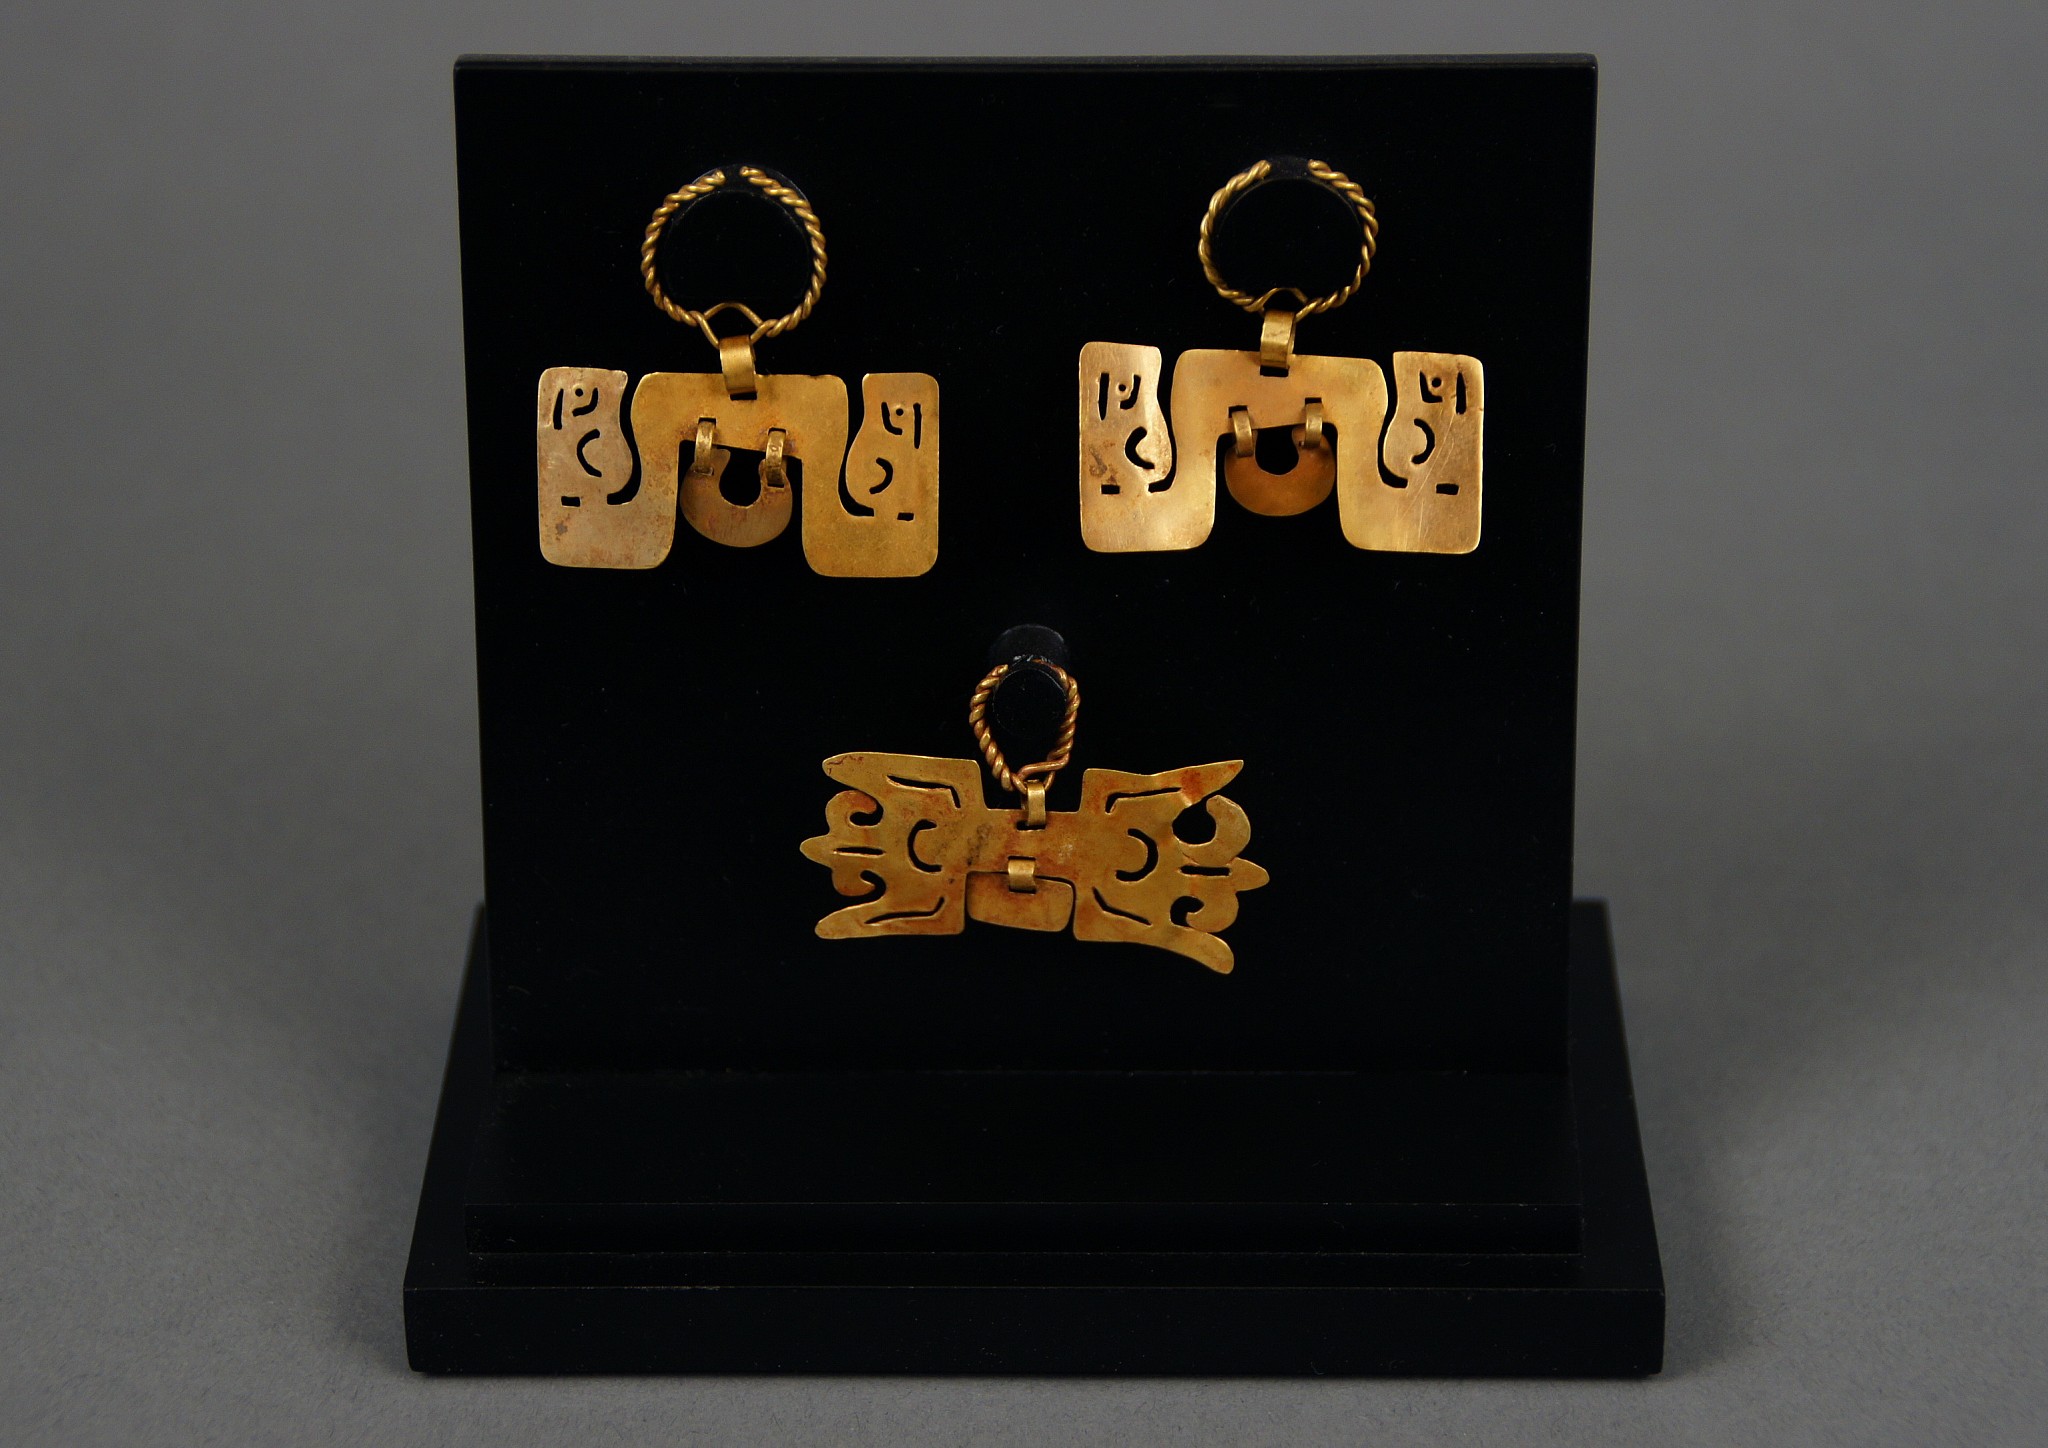 Peru, Chavin Pair of Gold Ear Ornaments and a Gold Nose Ornament with double chevron
The pair of gold ornaments, each with a double headed serpent with cut-out facial details, suspended by a twisted wire loop, and a suspension plaque dangleA gold nose ornament with cutout design and a central suspension plaque. The single nose ornament has a cut-out design sign in an abstract avian face or that of opposing chevrons, suspended by a twisted gold wire loop. pl. 15.
Media: Metal
Dimensions: Widths 1 1/2 inches each; Width 1 3/4 inches
Price Upon Request
94157